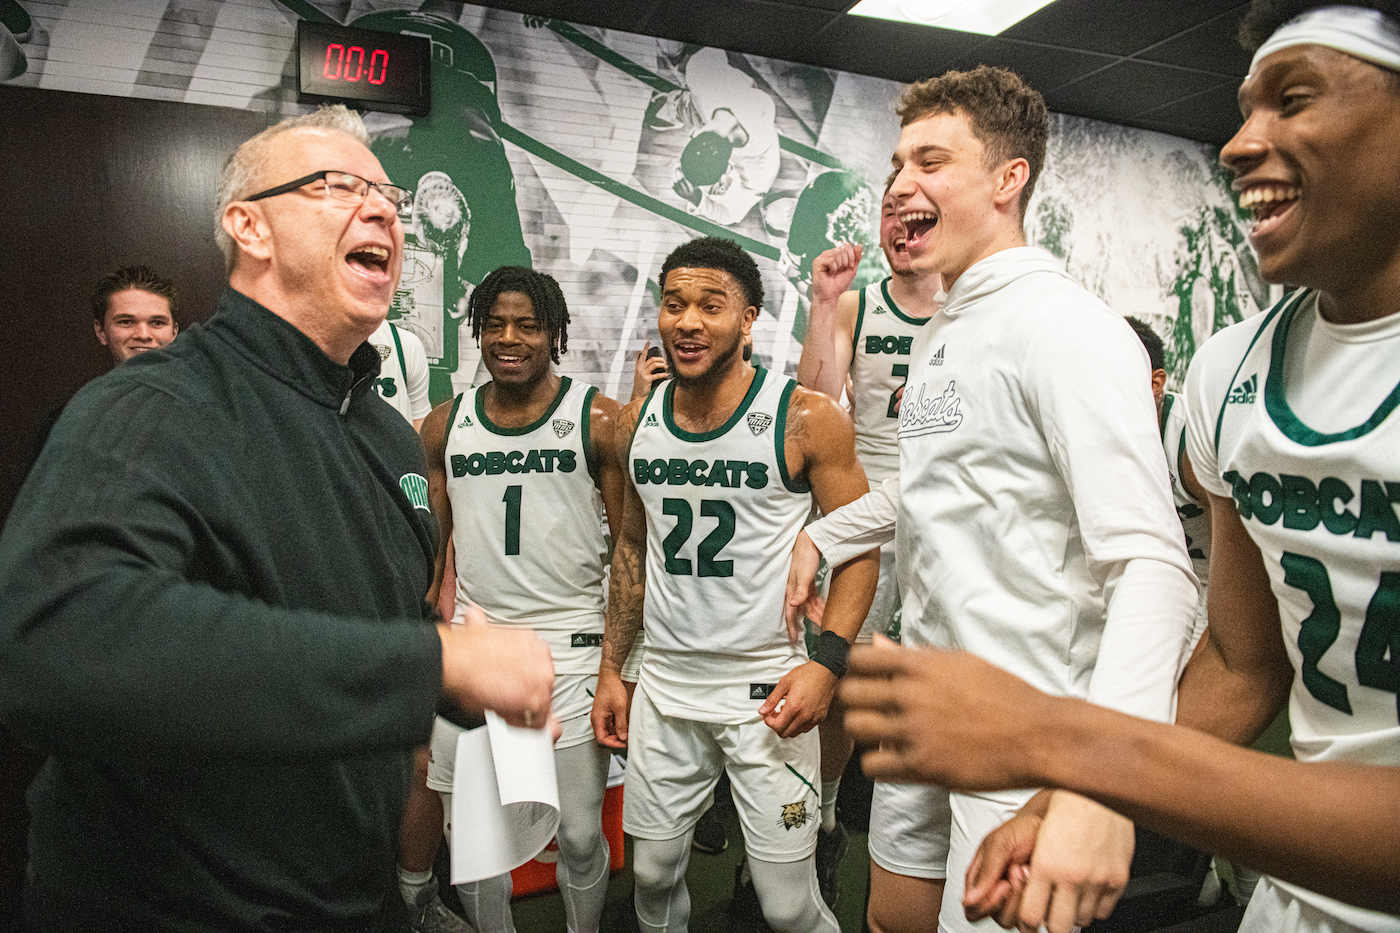 Head coach Jeff Boals and several basketball players are all smiles after a win